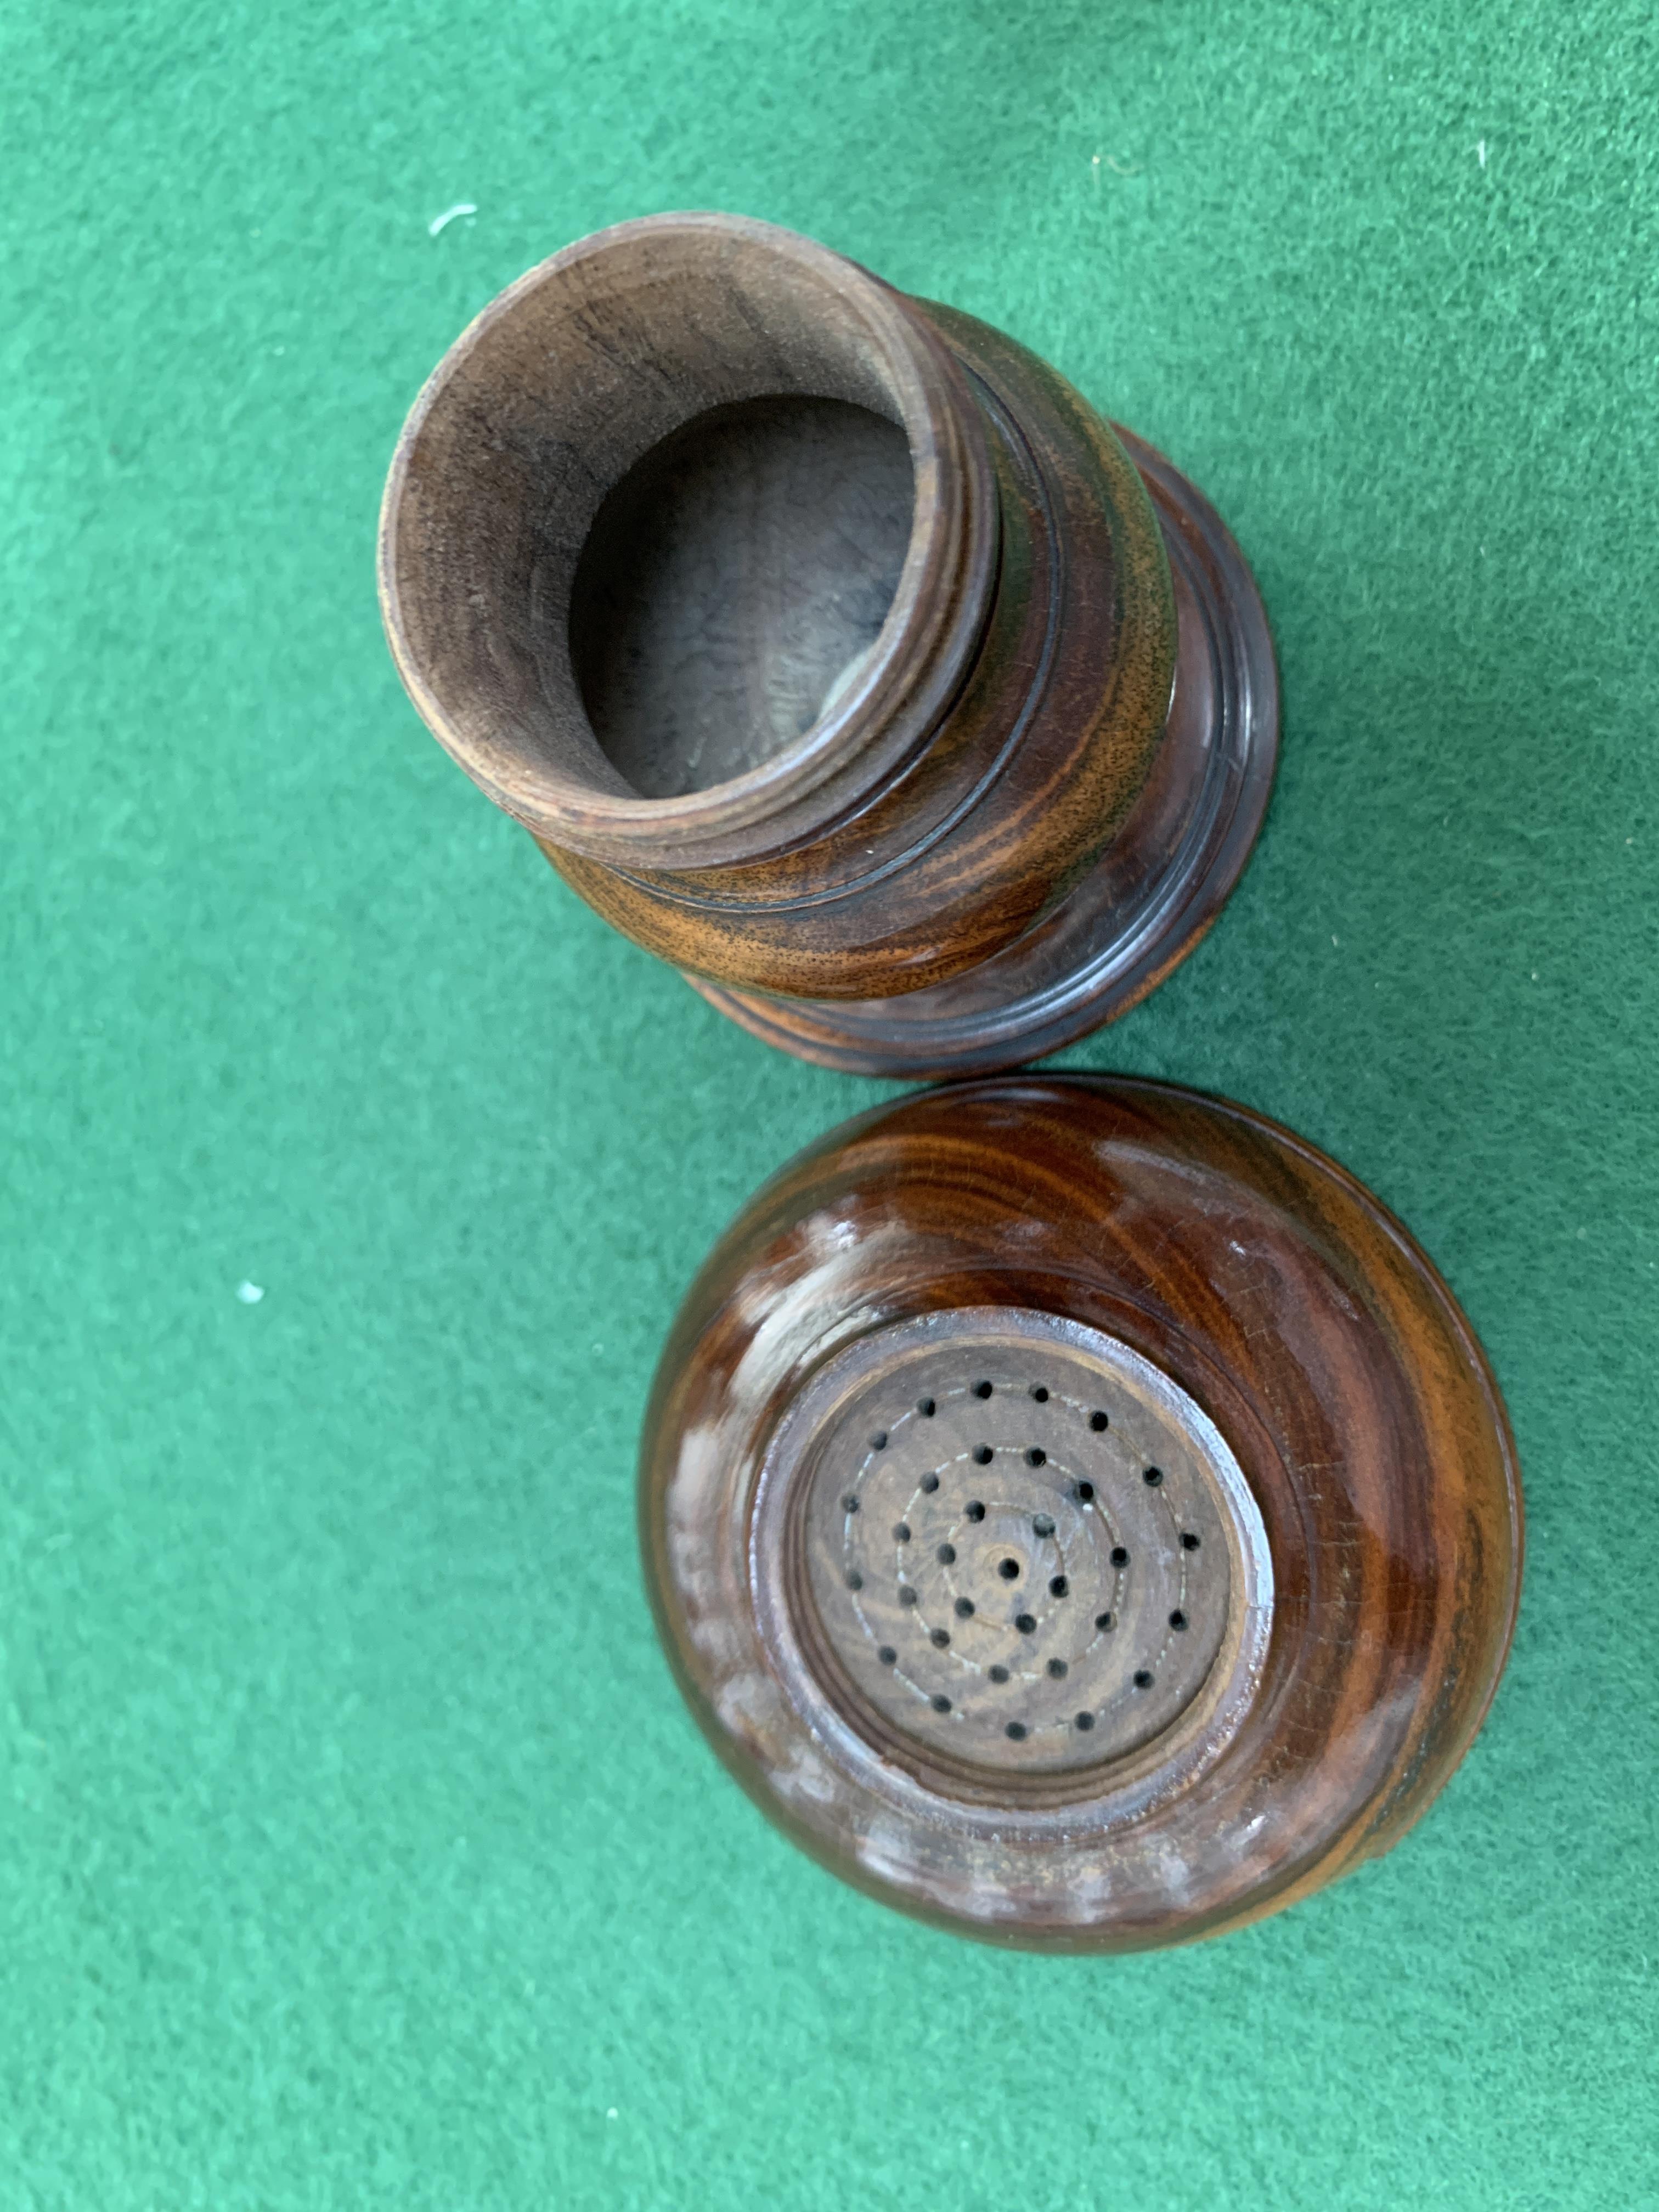 THREE TREEN LIGNUM VITAE POUNCE POTS LATE 18TH / EARLY 19TH CENTURY each with a flared pierced - Image 12 of 18